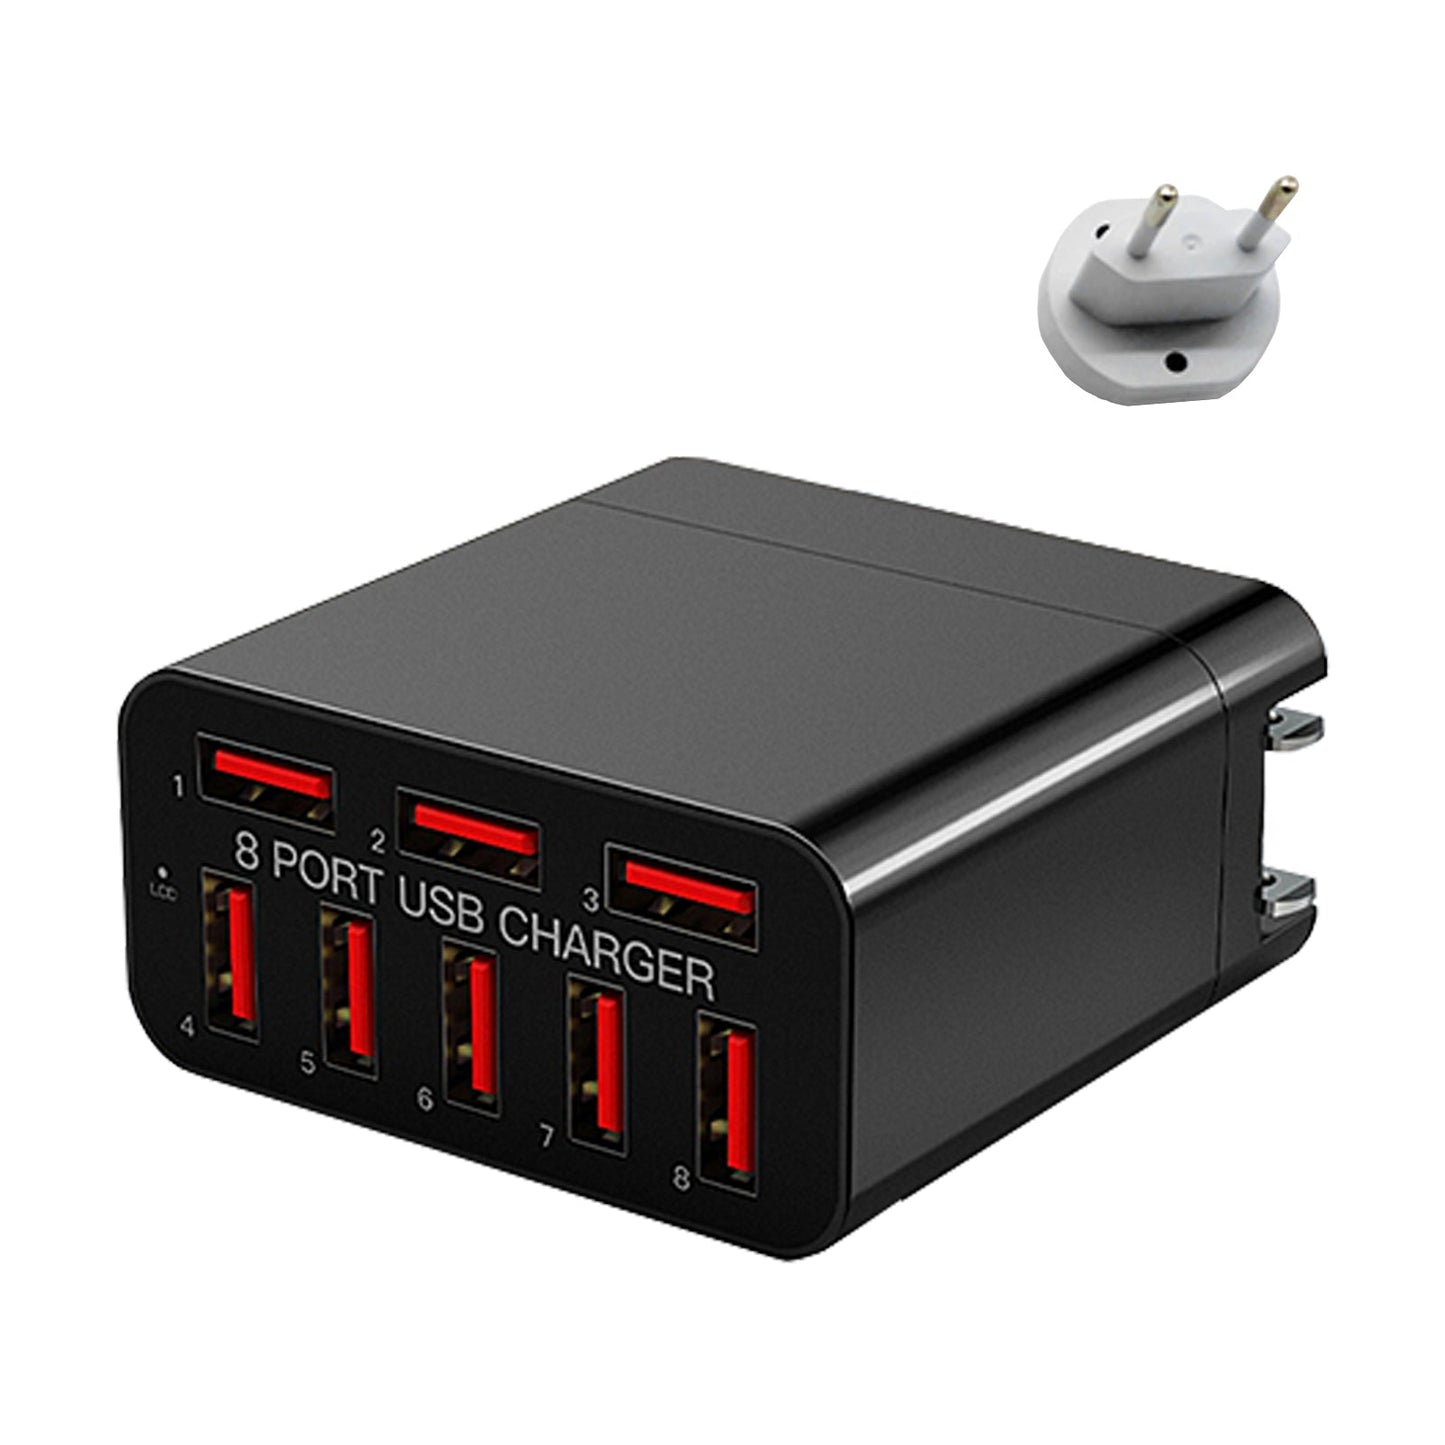 EU Plug 40W 8 Port USB Charger Quick Charge Multi Port Power Adapter for Macbook